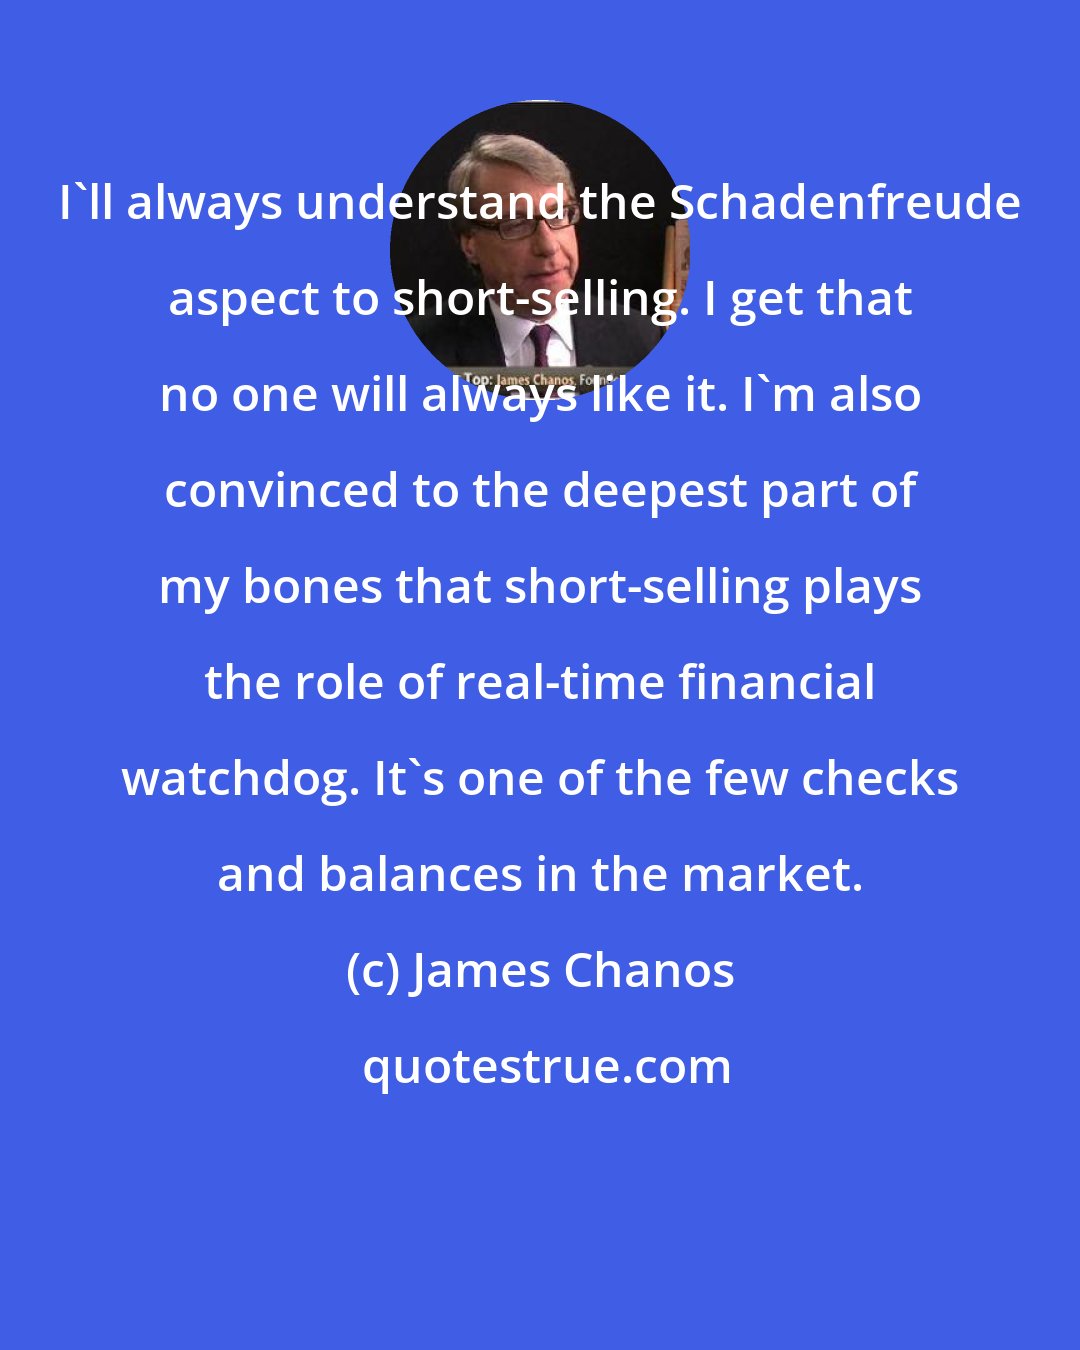 James Chanos: I'll always understand the Schadenfreude aspect to short-selling. I get that no one will always like it. I'm also convinced to the deepest part of my bones that short-selling plays the role of real-time financial watchdog. It's one of the few checks and balances in the market.